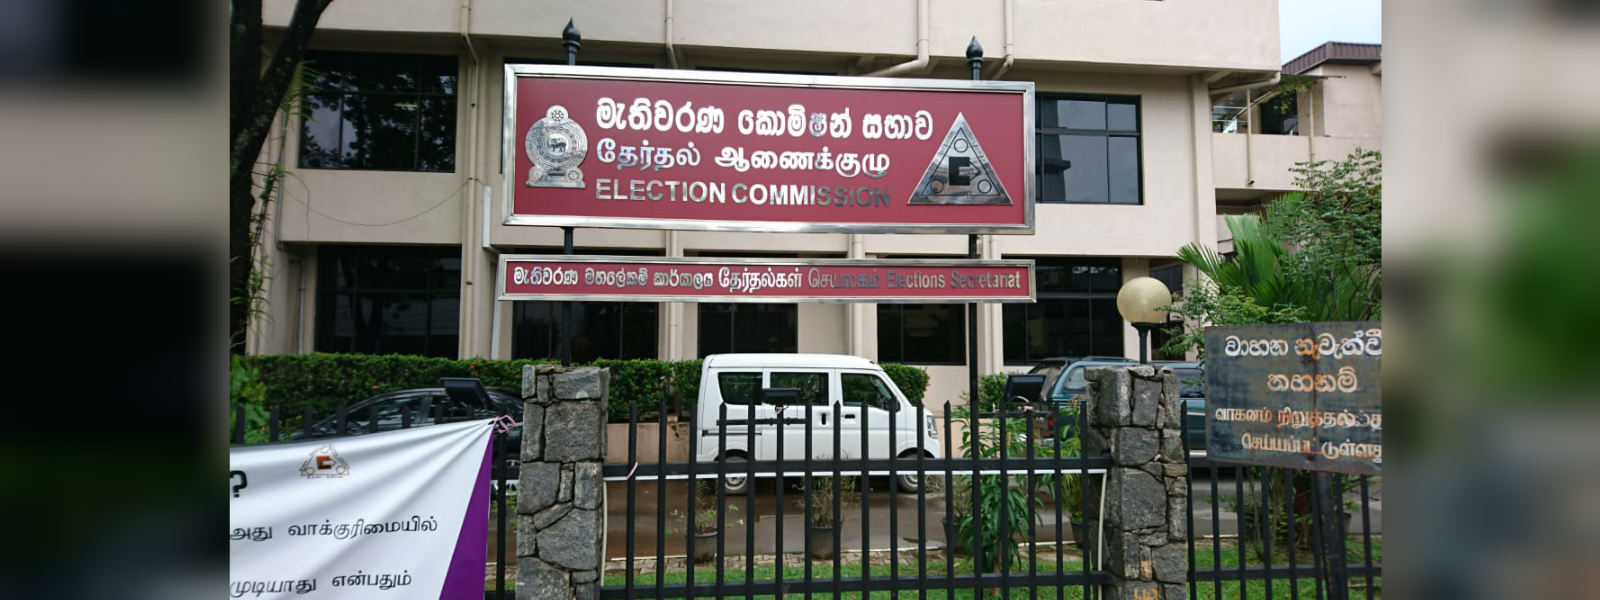 Foreign election observers arrive in Sri Lanka for Presidential election